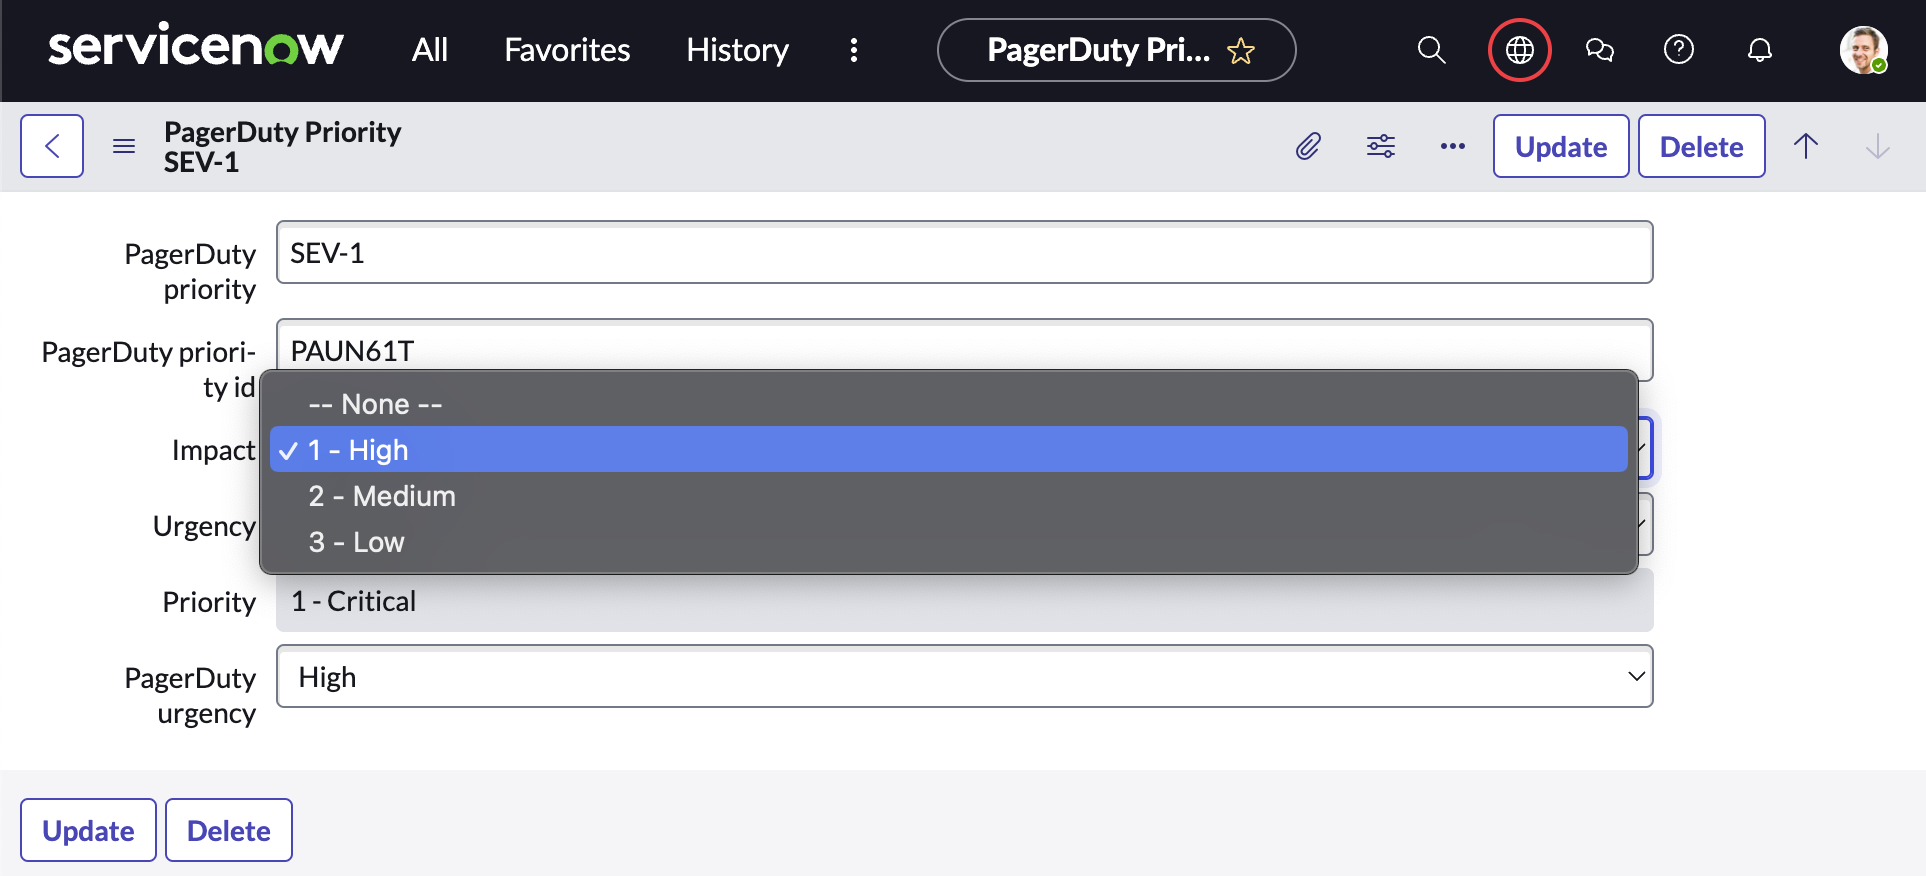 Select ServiceNow Impact and Urgency value pairs to map to the PagerDuty Priority record